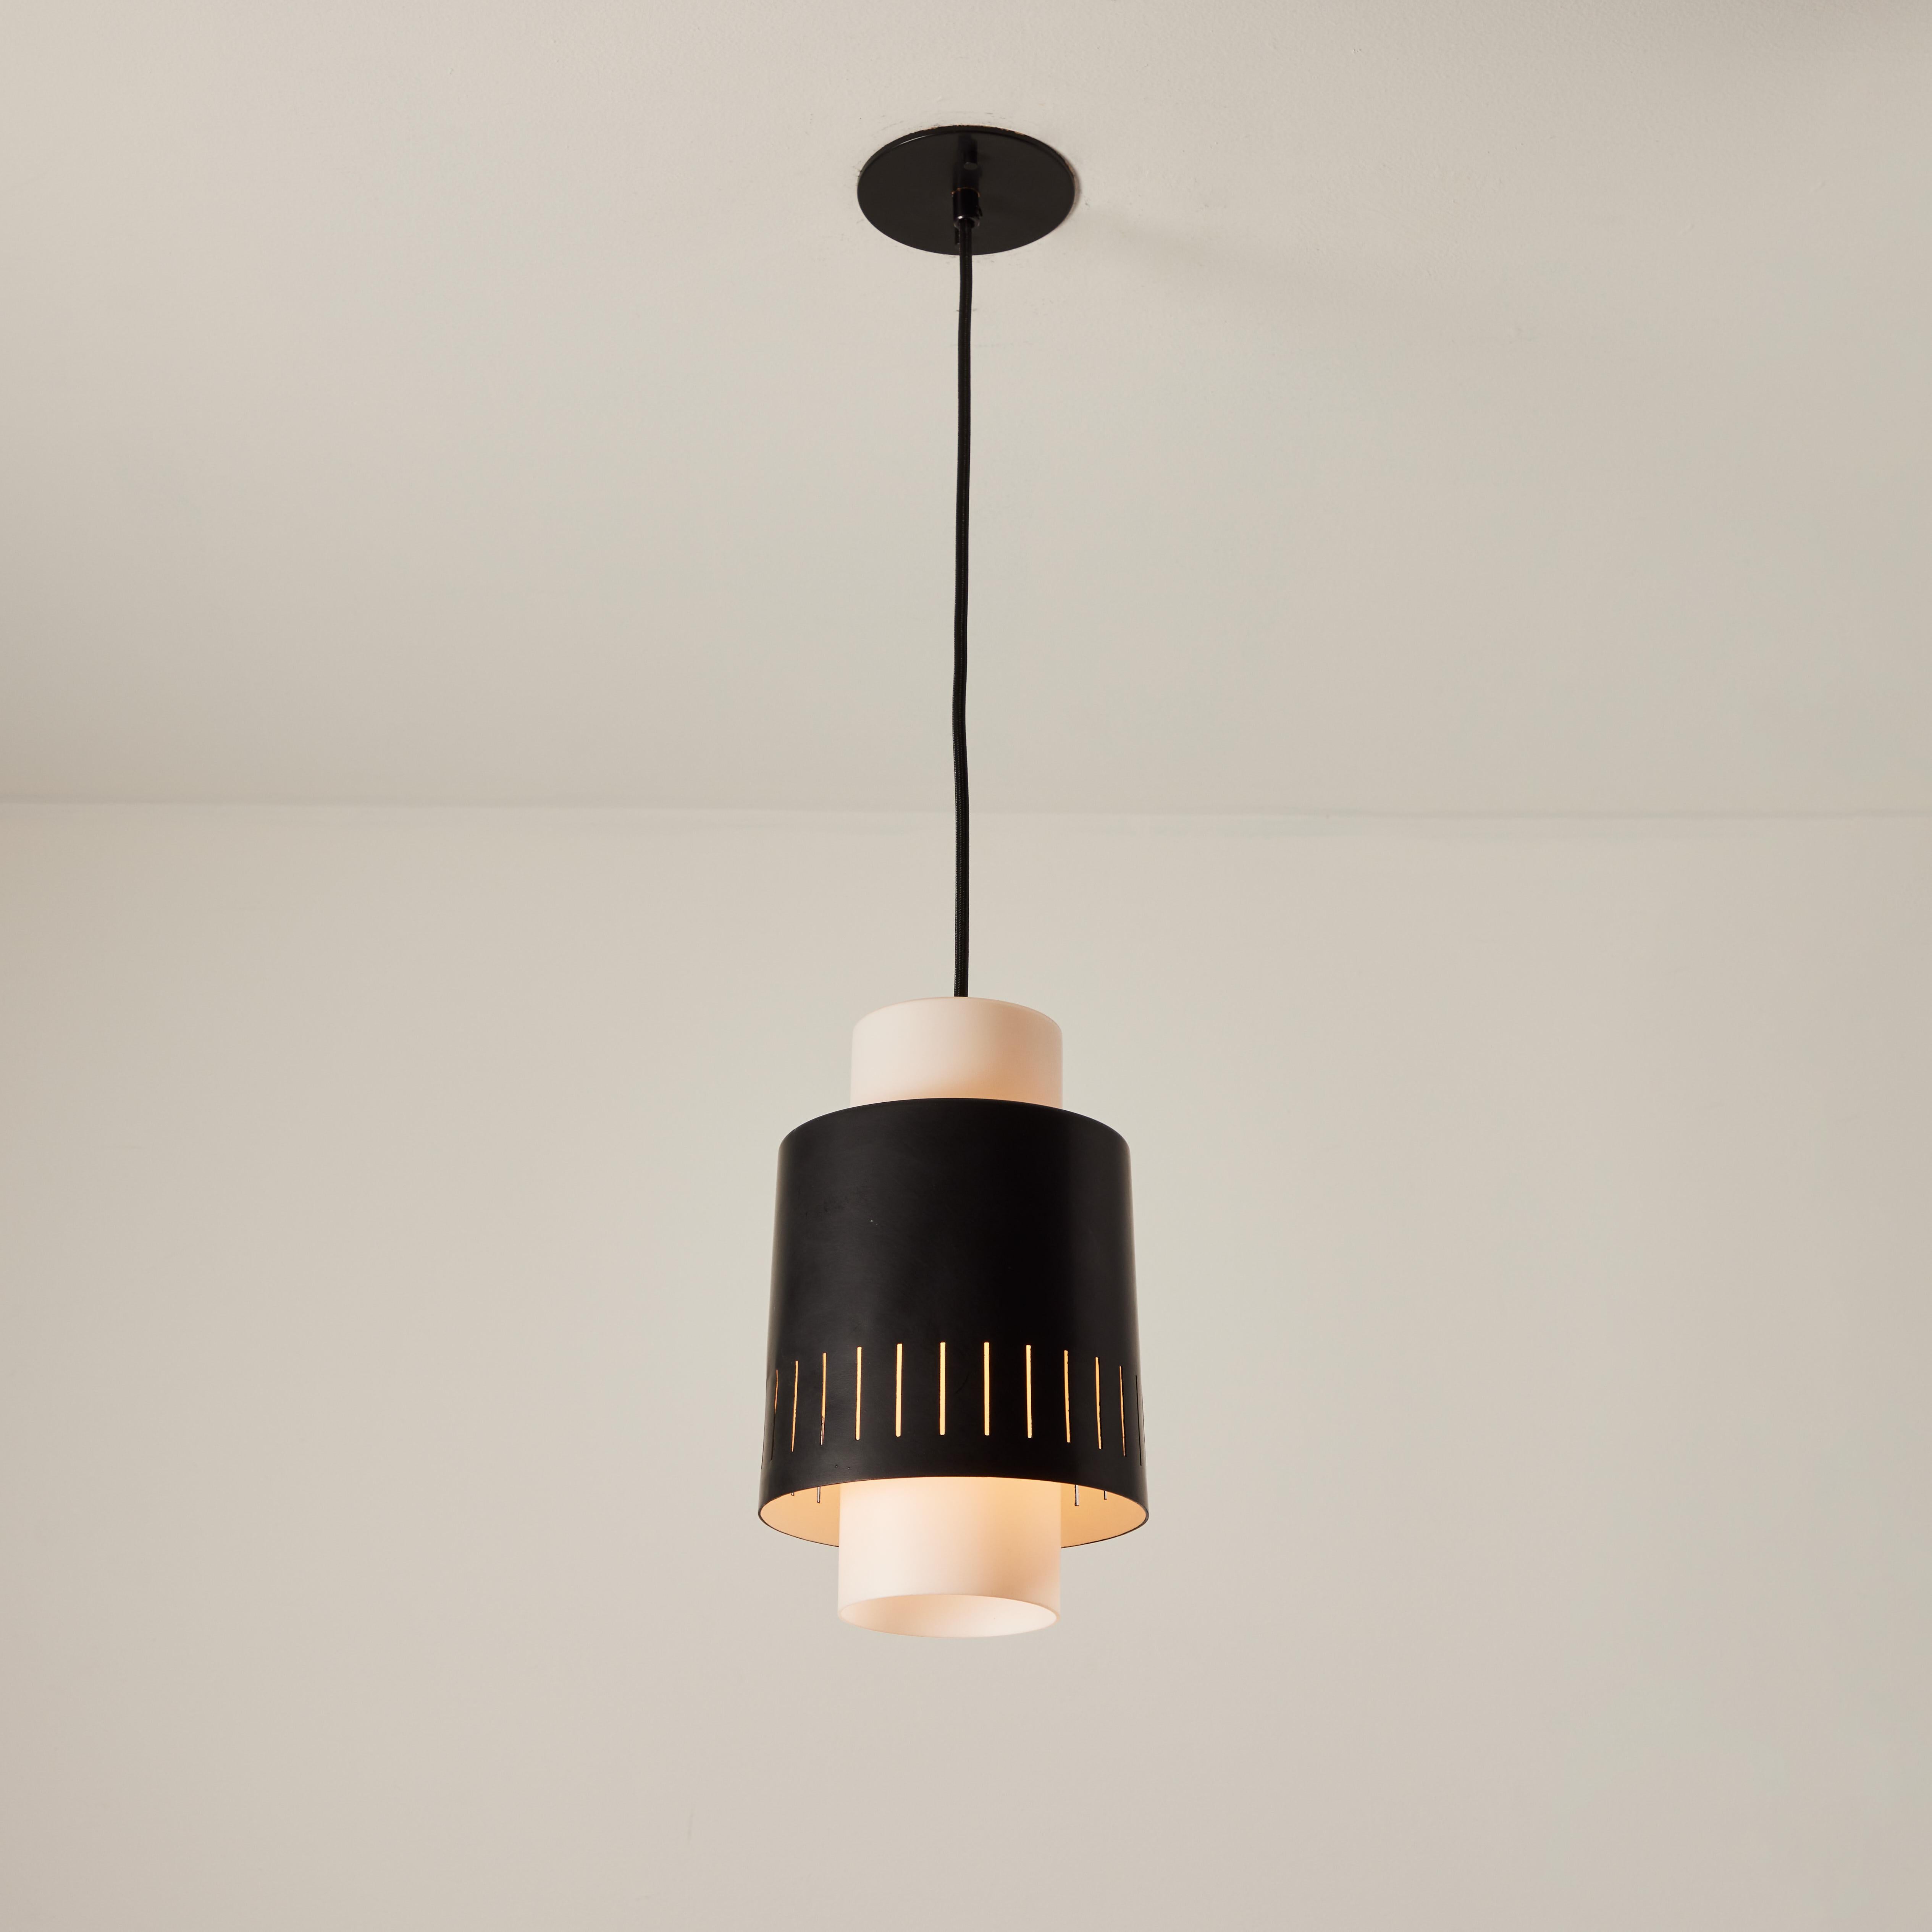 1960s Glass & Perforated Metal Pendant Attributed to Bruno Gatta for Stilnovo For Sale 6